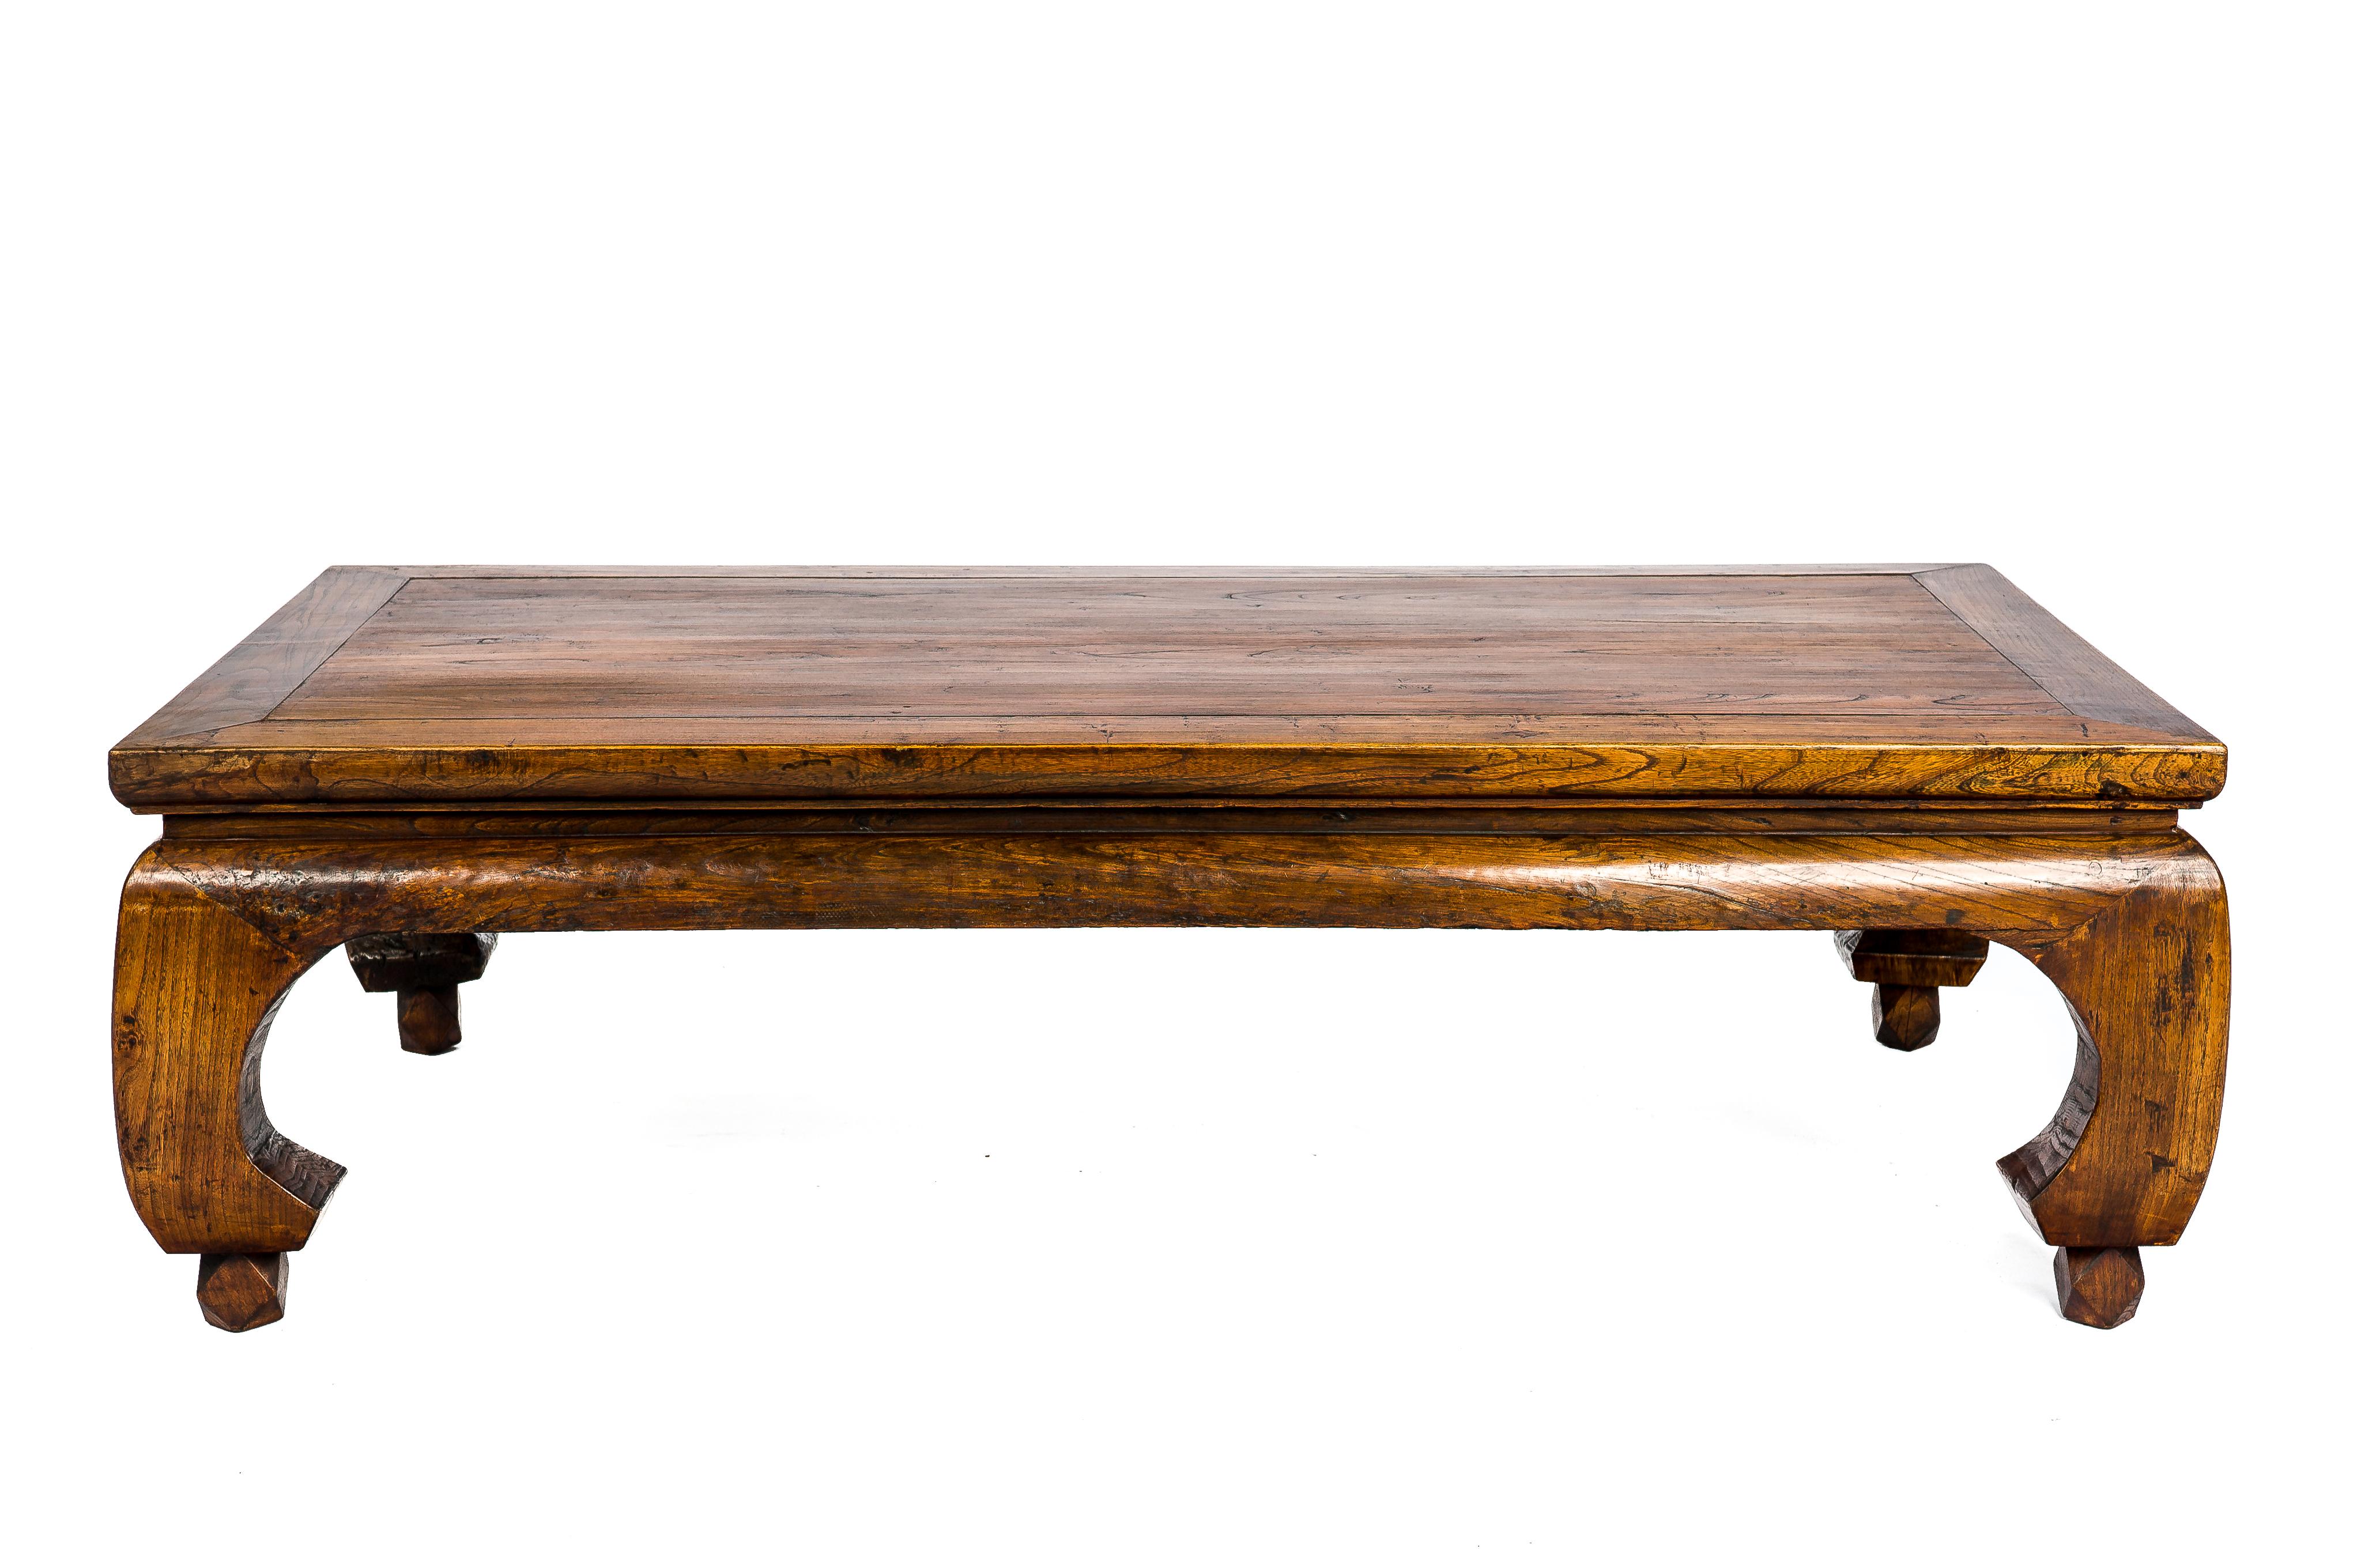 A Chinese Kang bed that was completely made in Ju Mu or elmwood.
The wood shows a beautiful dark grain and it has a rich and warm honey color with great patina and gloss. A Kang bed is primarily served as a bed placed in the living quarters were